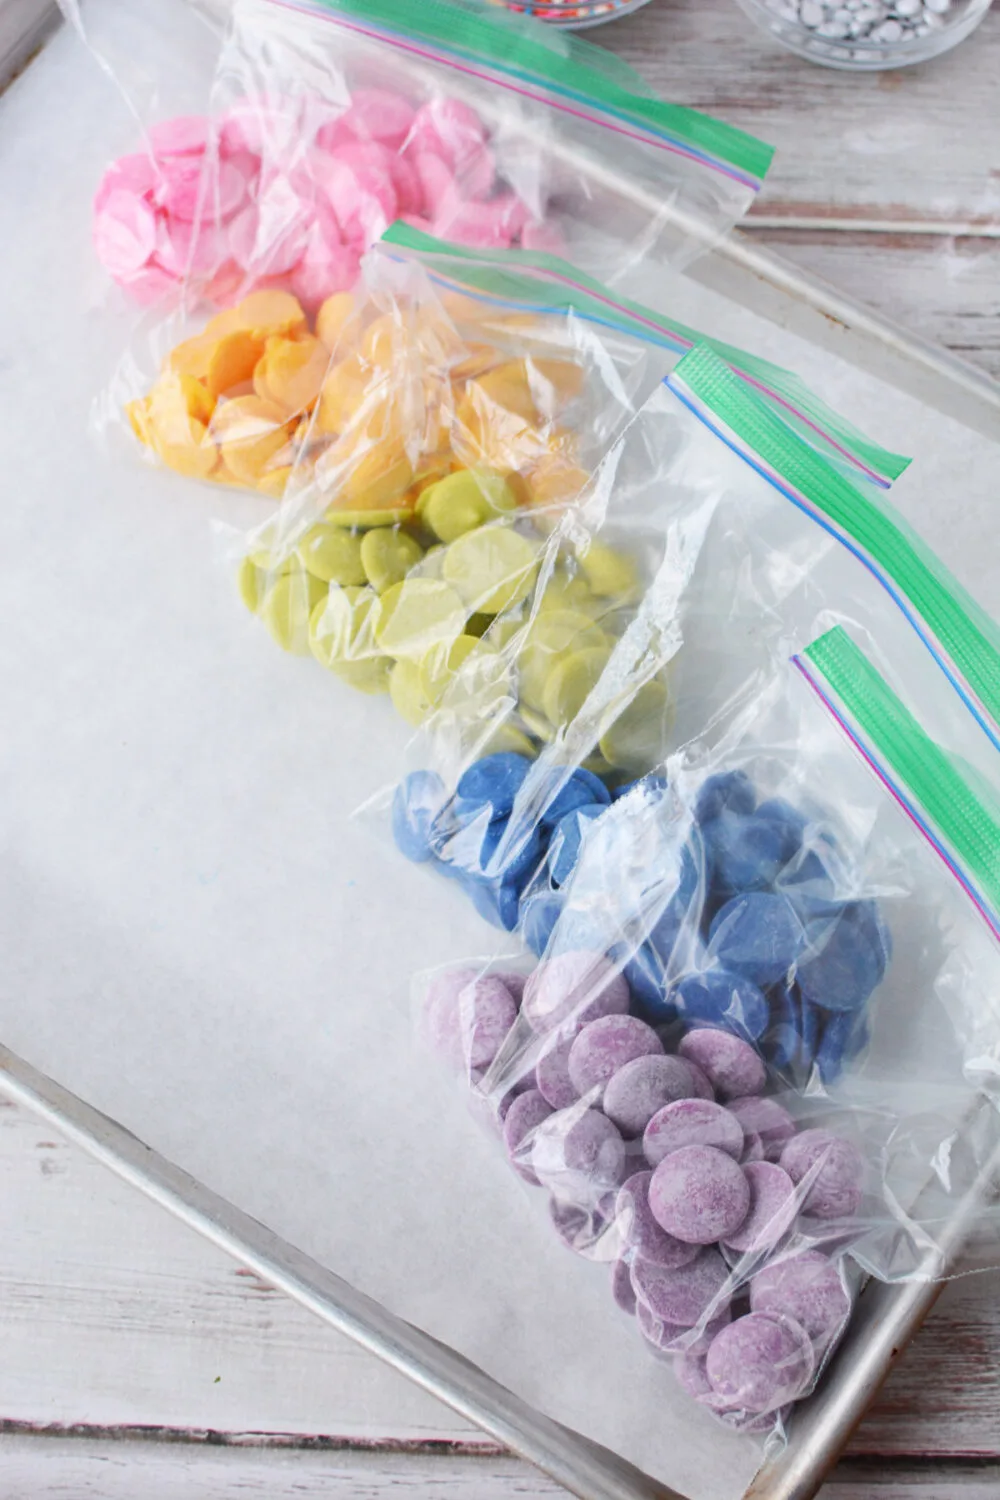 Bags of candy melts in a rainbow of colors. 